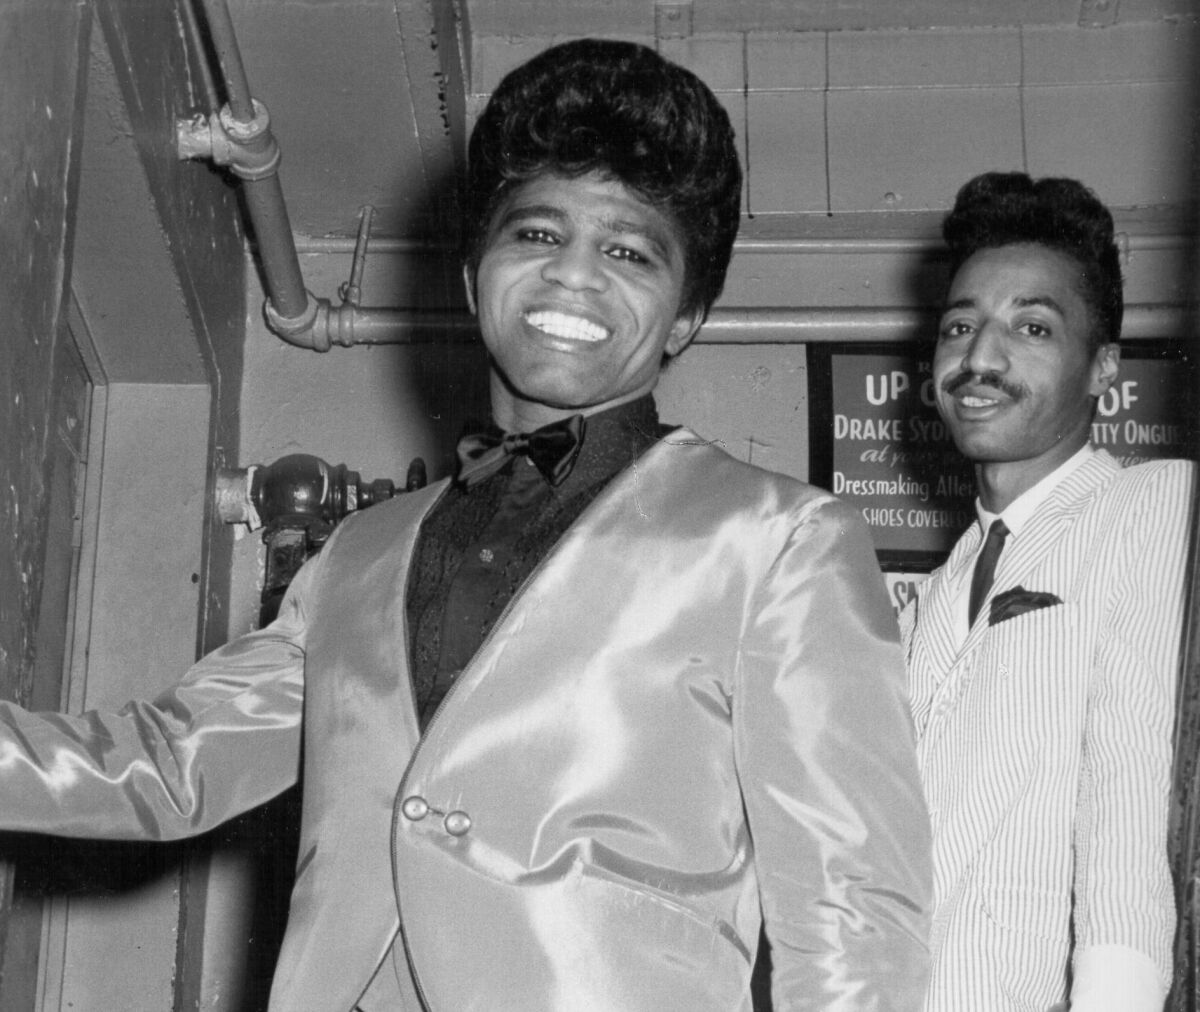 James Brown backstage at the Apollo Theatre with his cape man Danny Ray 